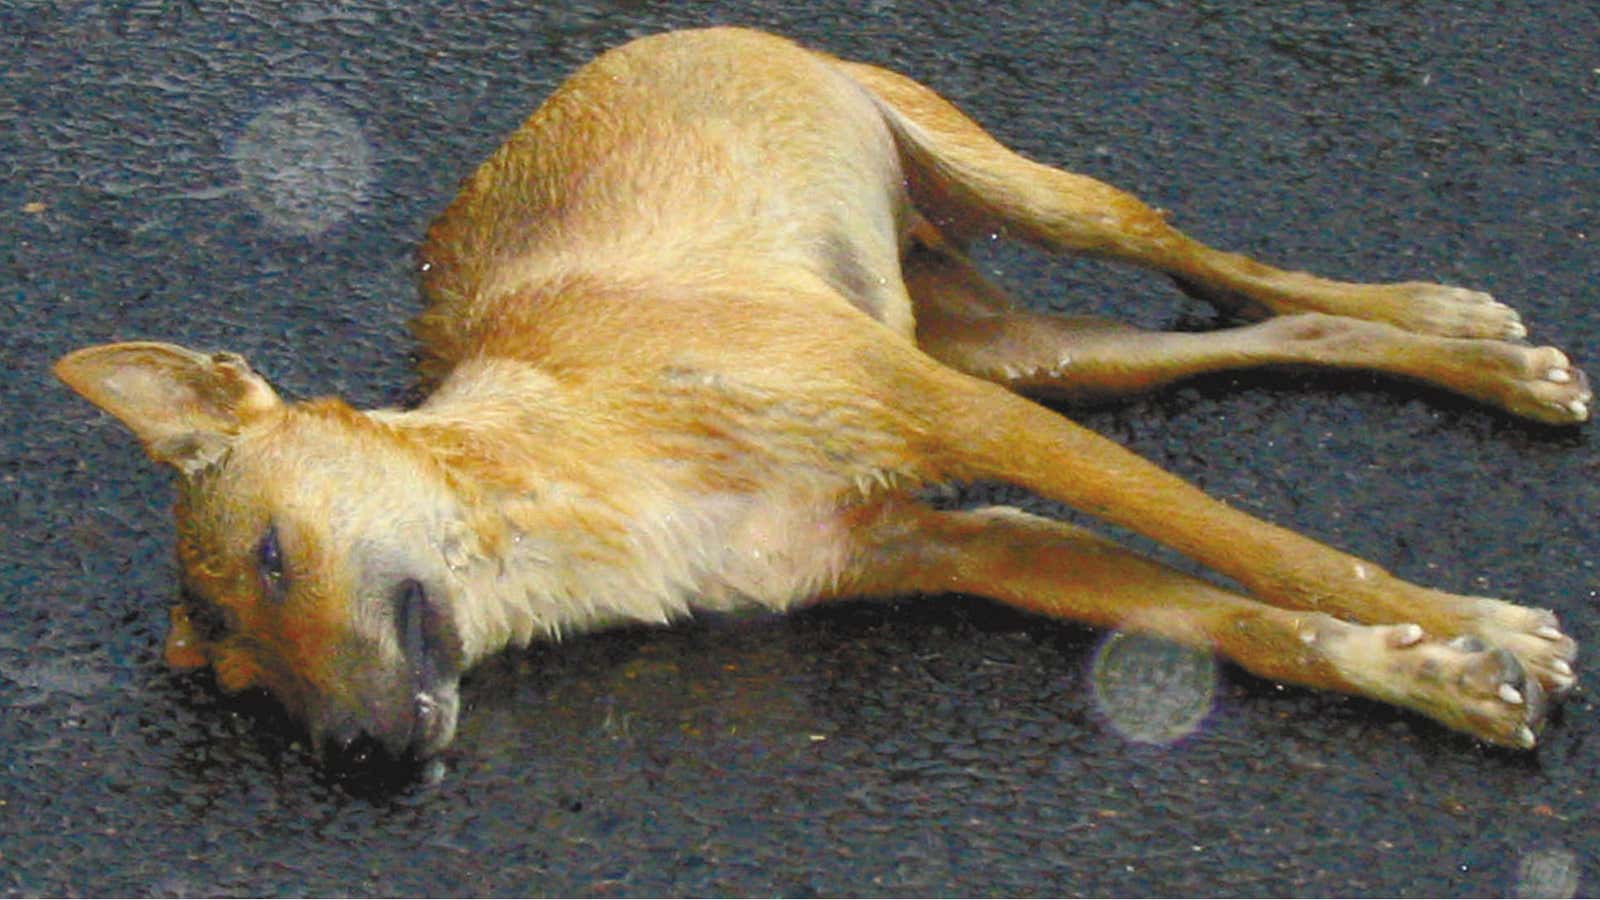 Dead dingoes: not good for the ecosystem.